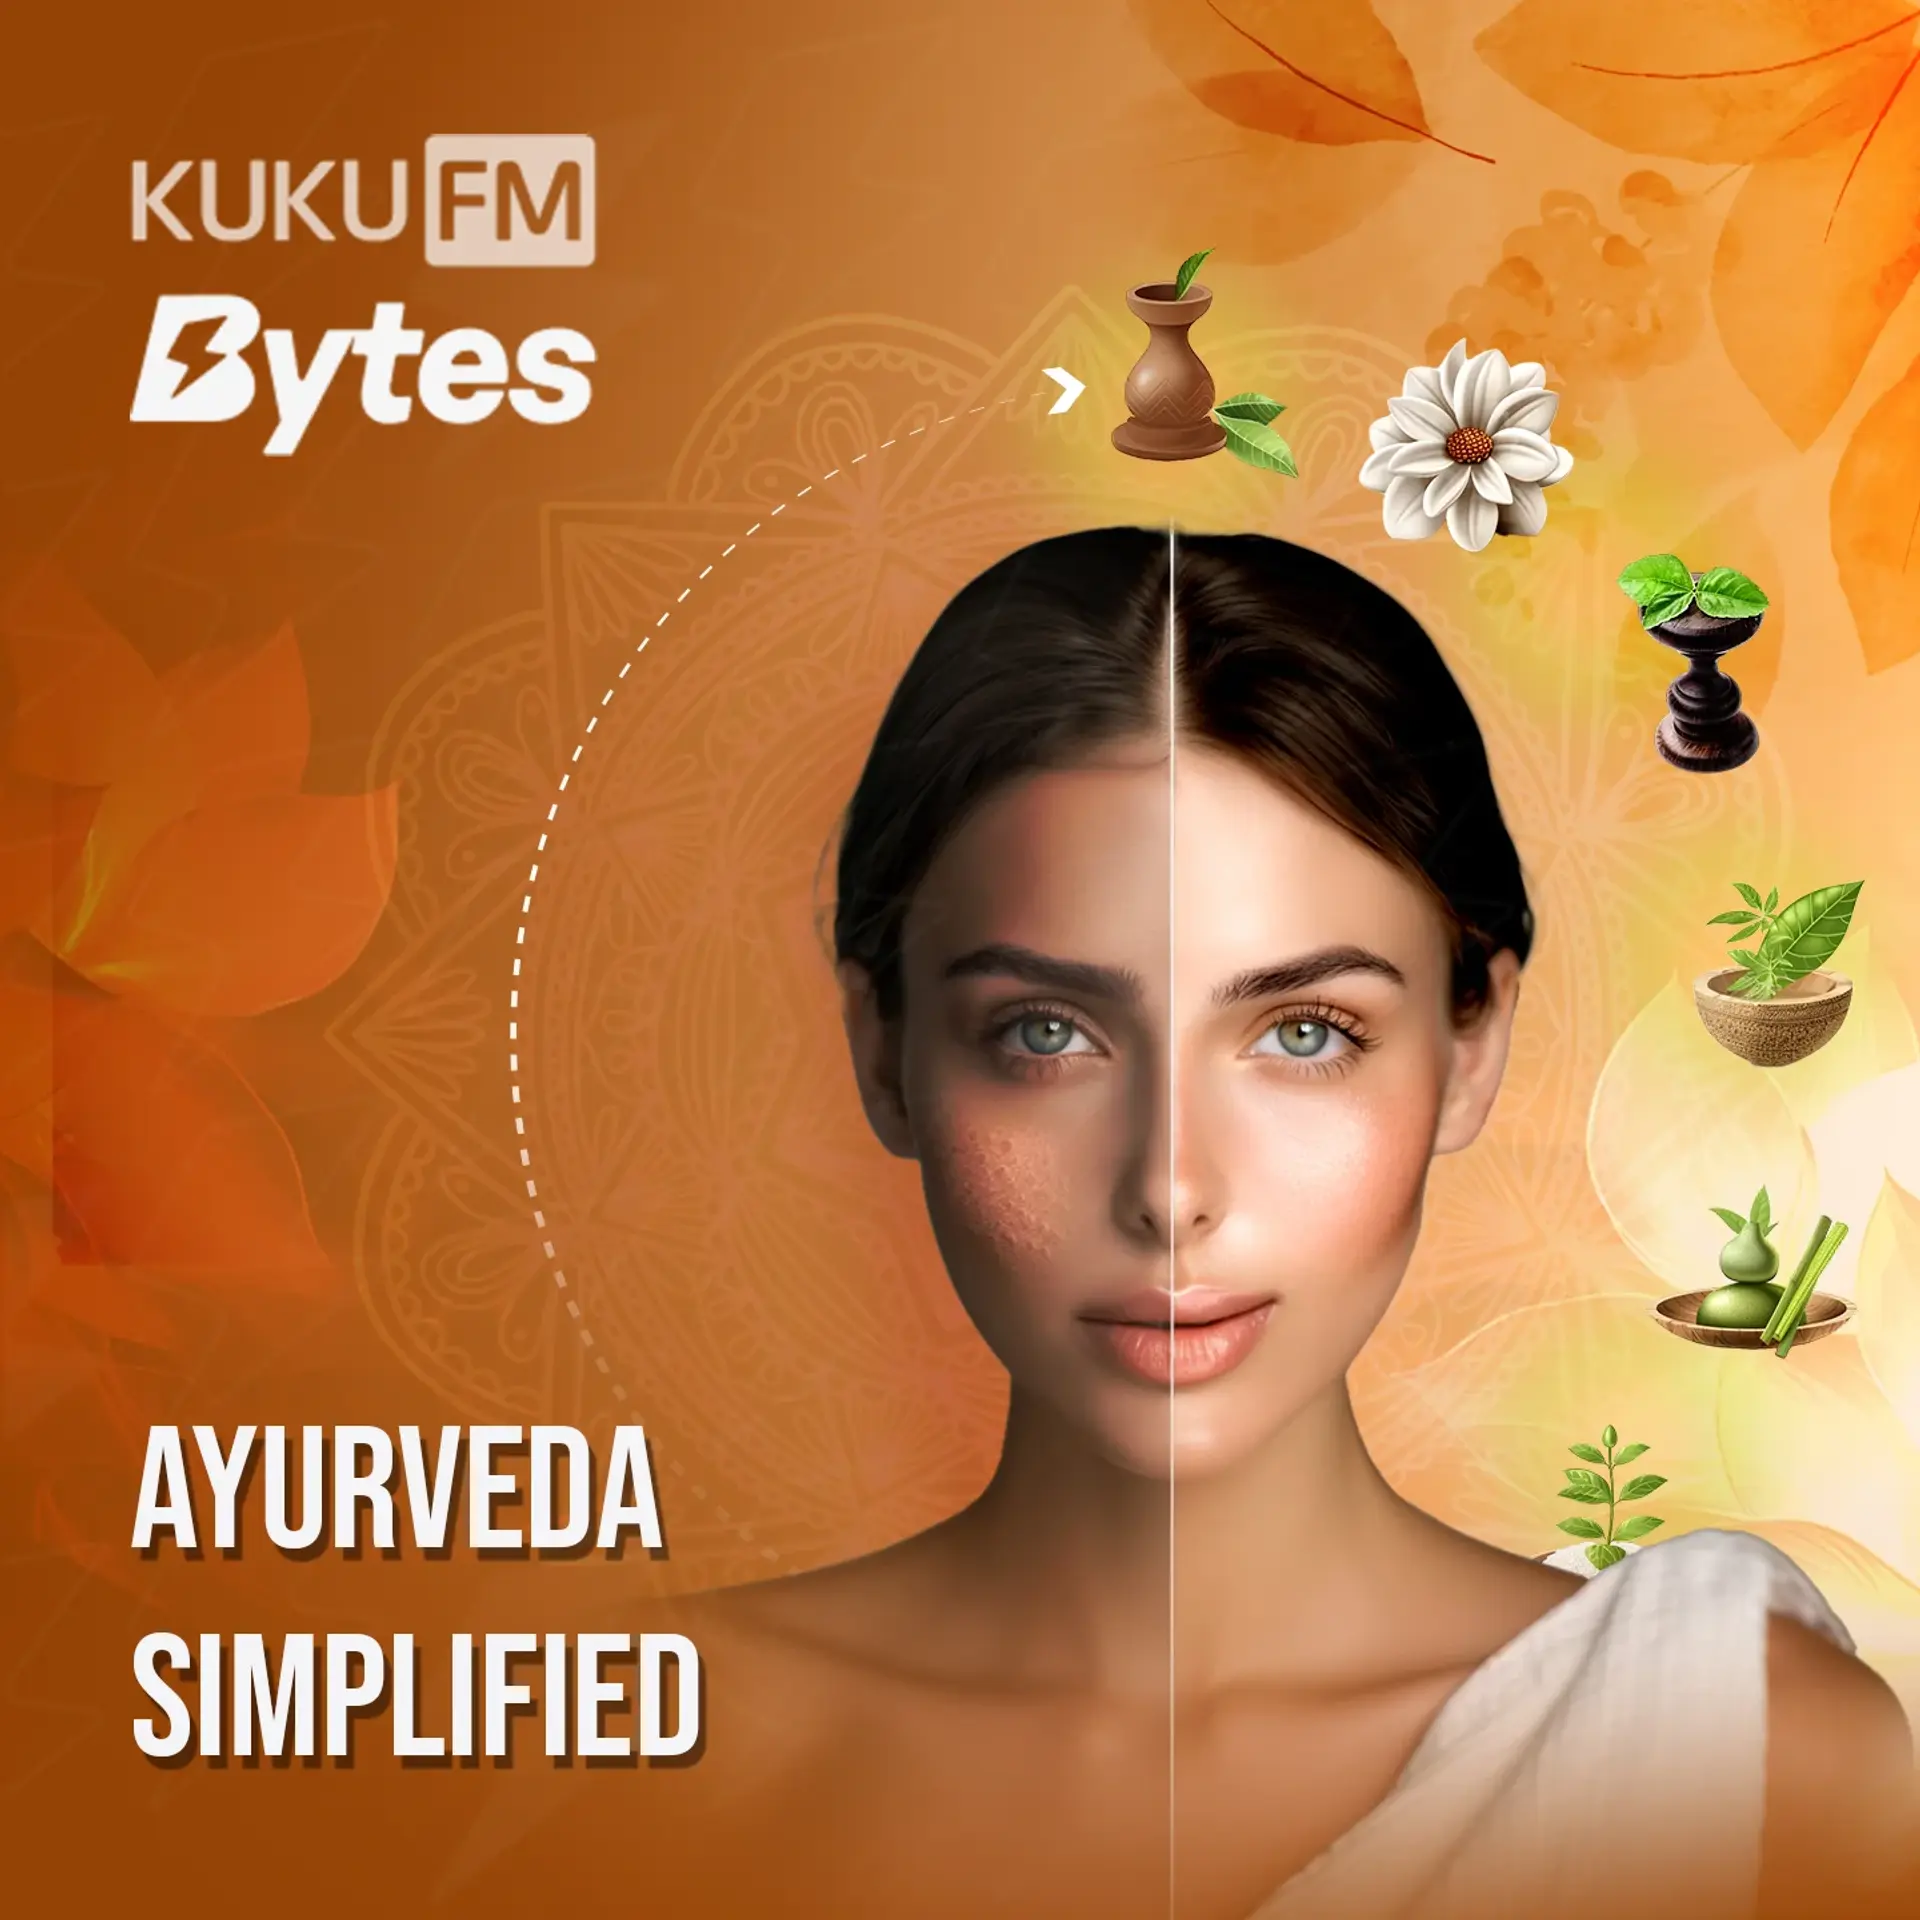 1. What is Ayurveda? | 